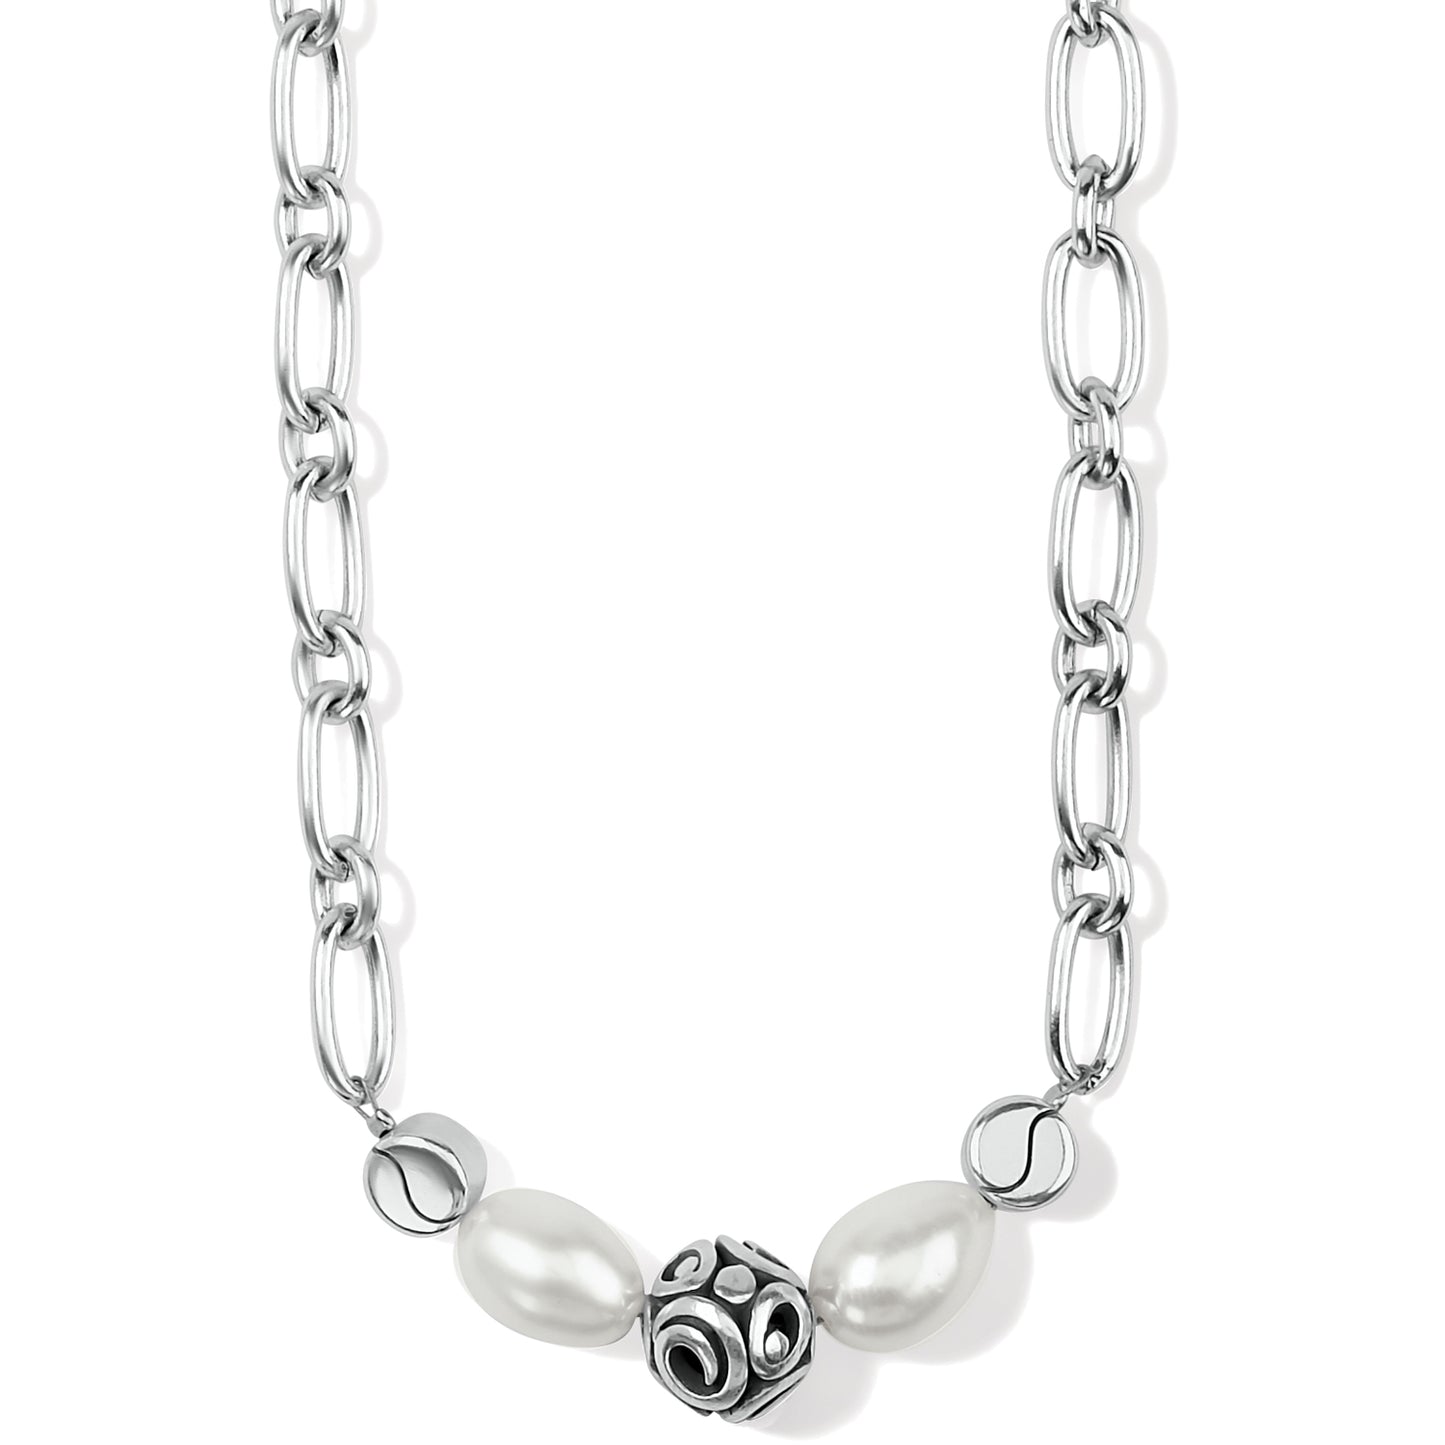 Contempo Pearl Short Necklace by Brighton inspired by silver jewelry artisans of Taxco, Mexico. Necklace features a single silver bead in the Contempo design in the center of two pearls on oval link adjustable chain. Measures 16" - 19 1/2".  Shop at The Painted Cottage an Annapolis Boutique.